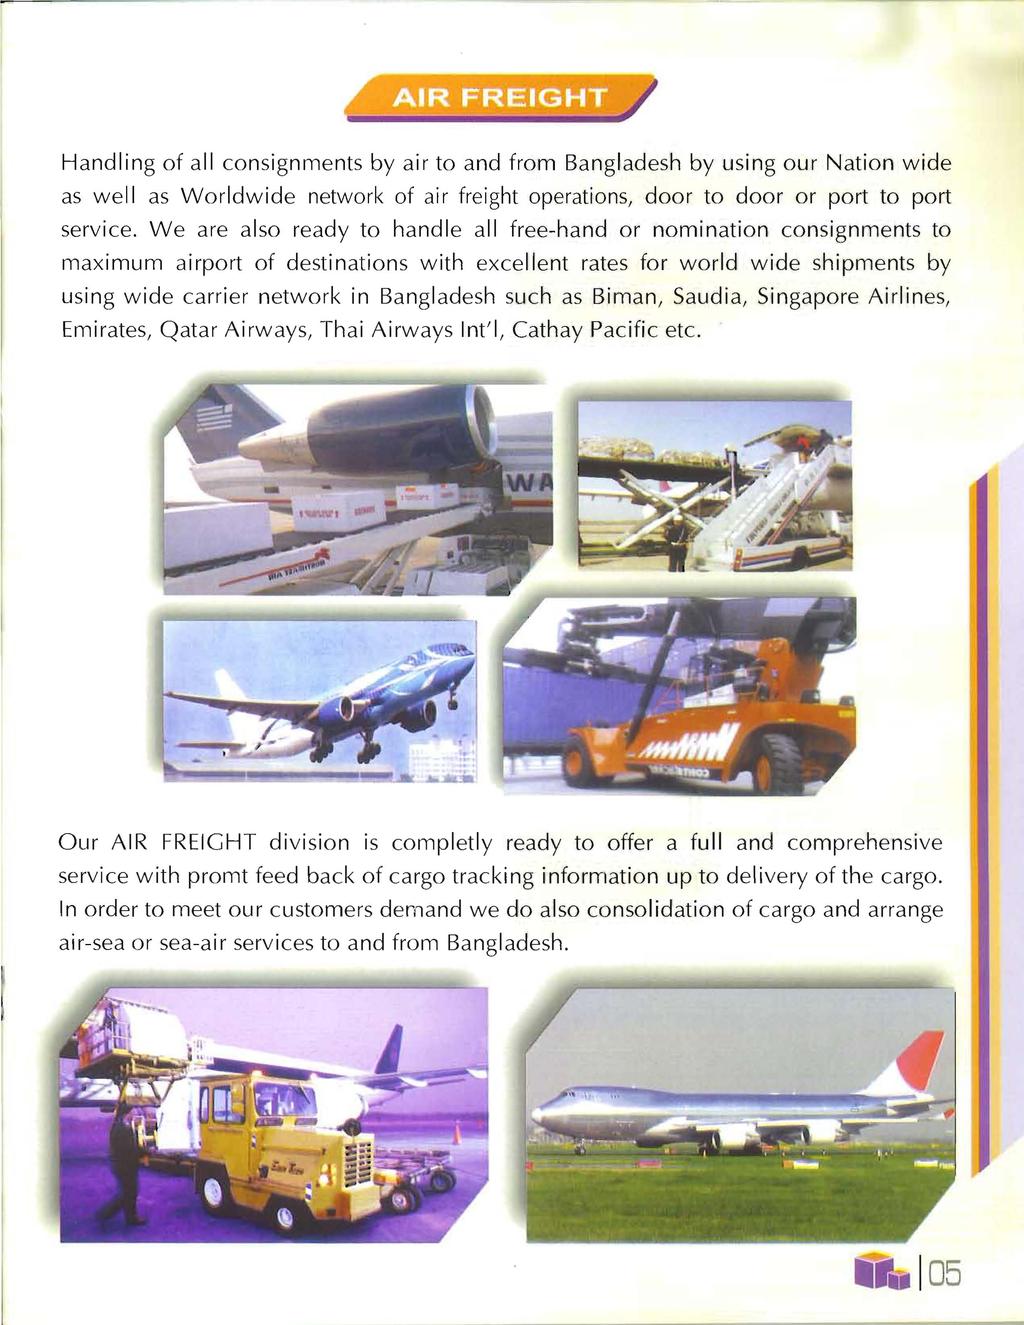 Handling of all consignments by air to and from Bangladesh by using our Nation wide as well as Worldwide network of ai r freight operations, door to door or port to port service.